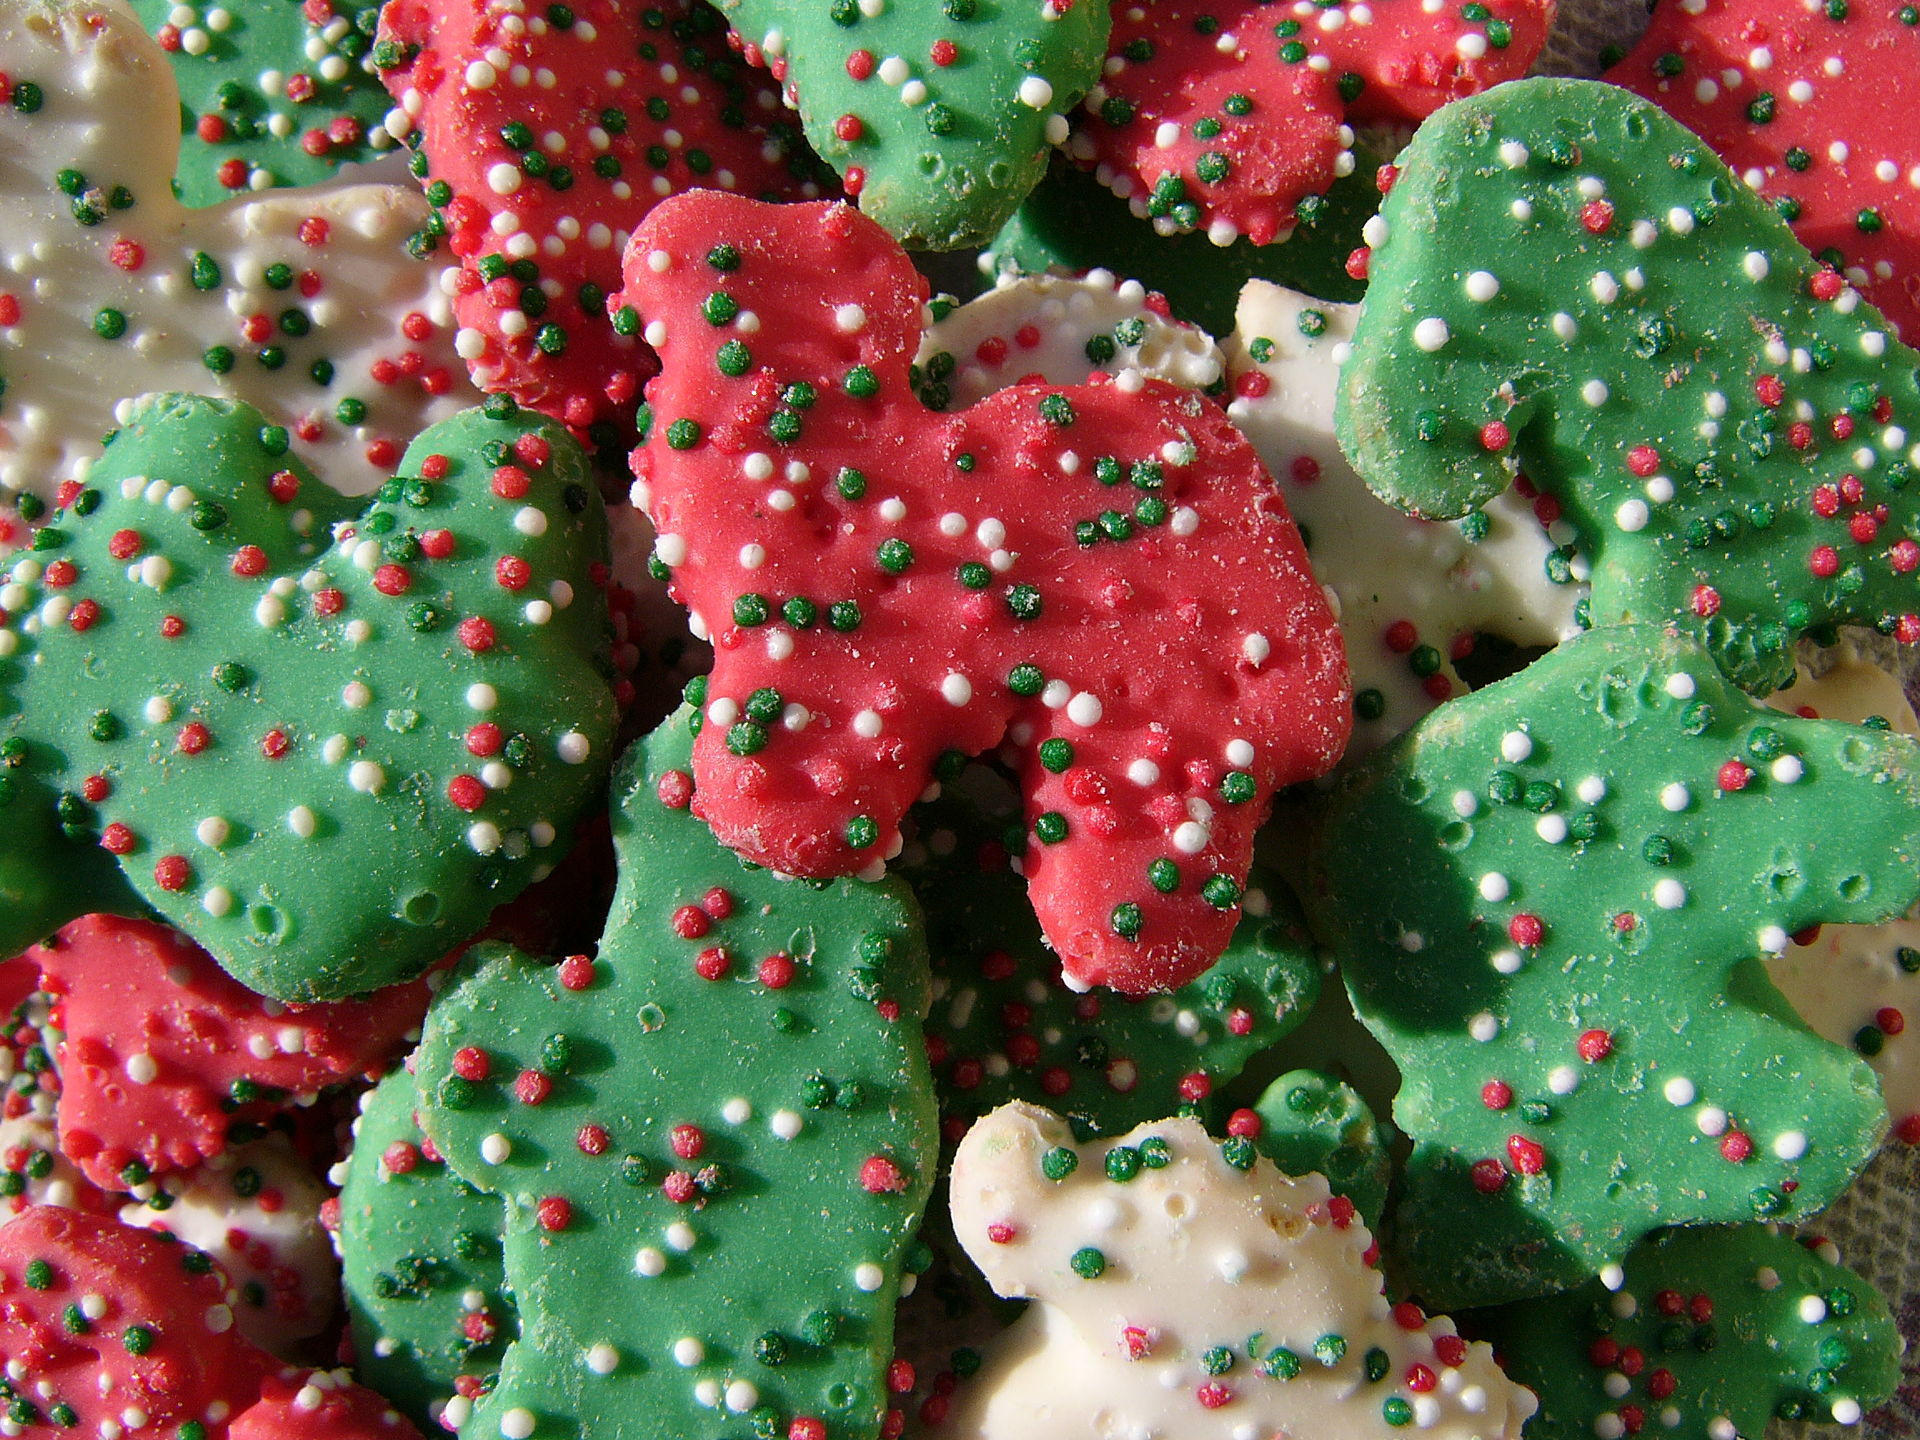 Store Bought Christmas Cookies
 [TOMT] [Food] Store bought Christmas cookies from 1980s